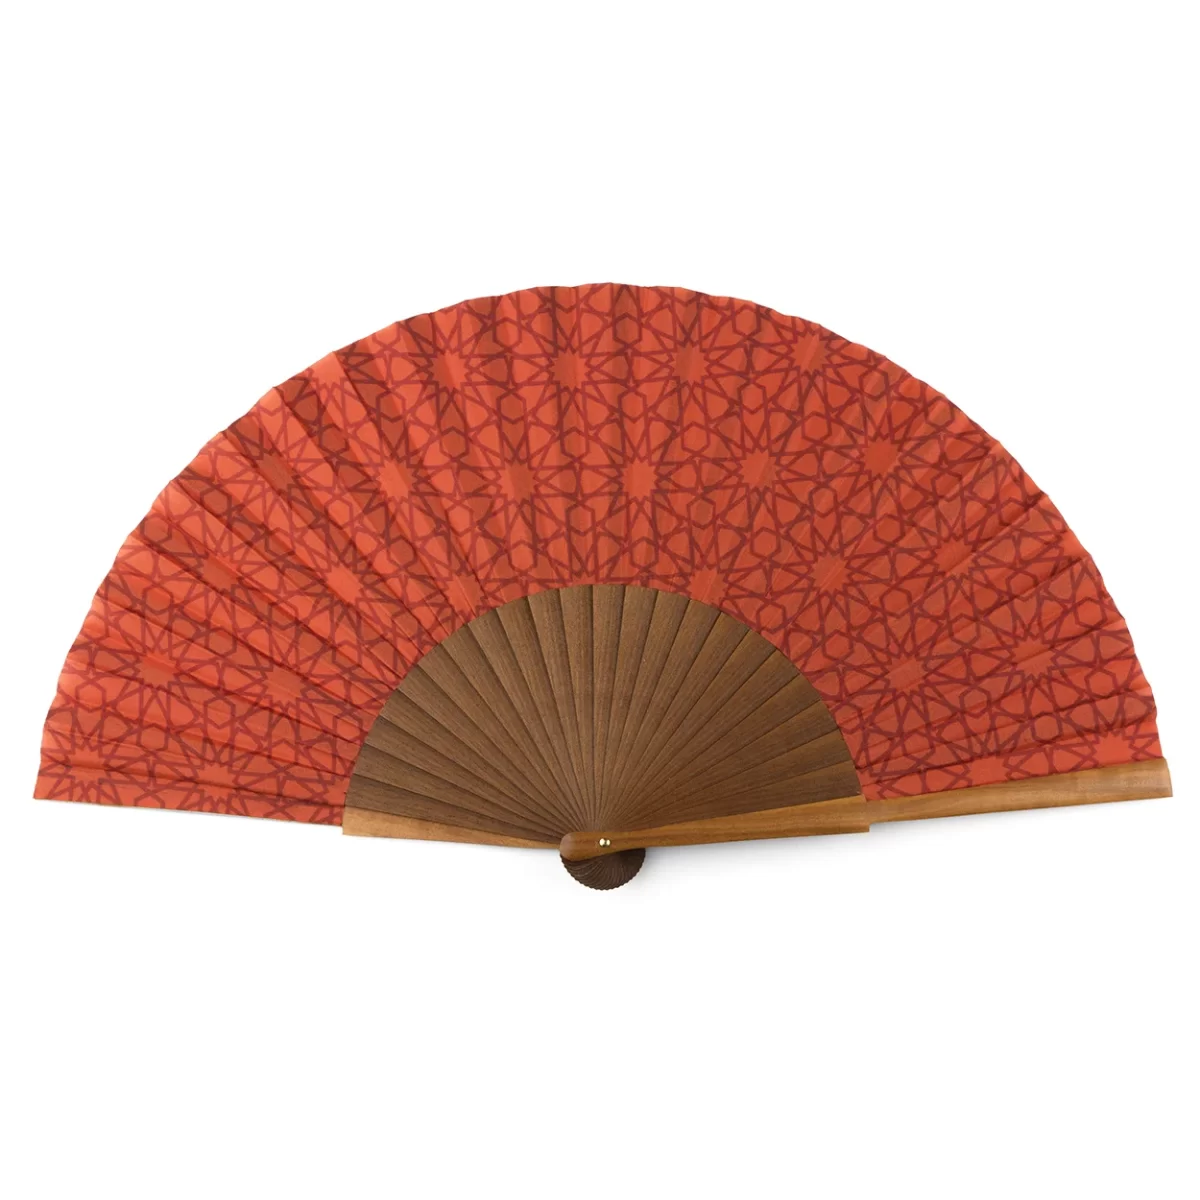 Red silk hand fan with bocapi wood inspired by the Arab mosaics of Al-Andalus.